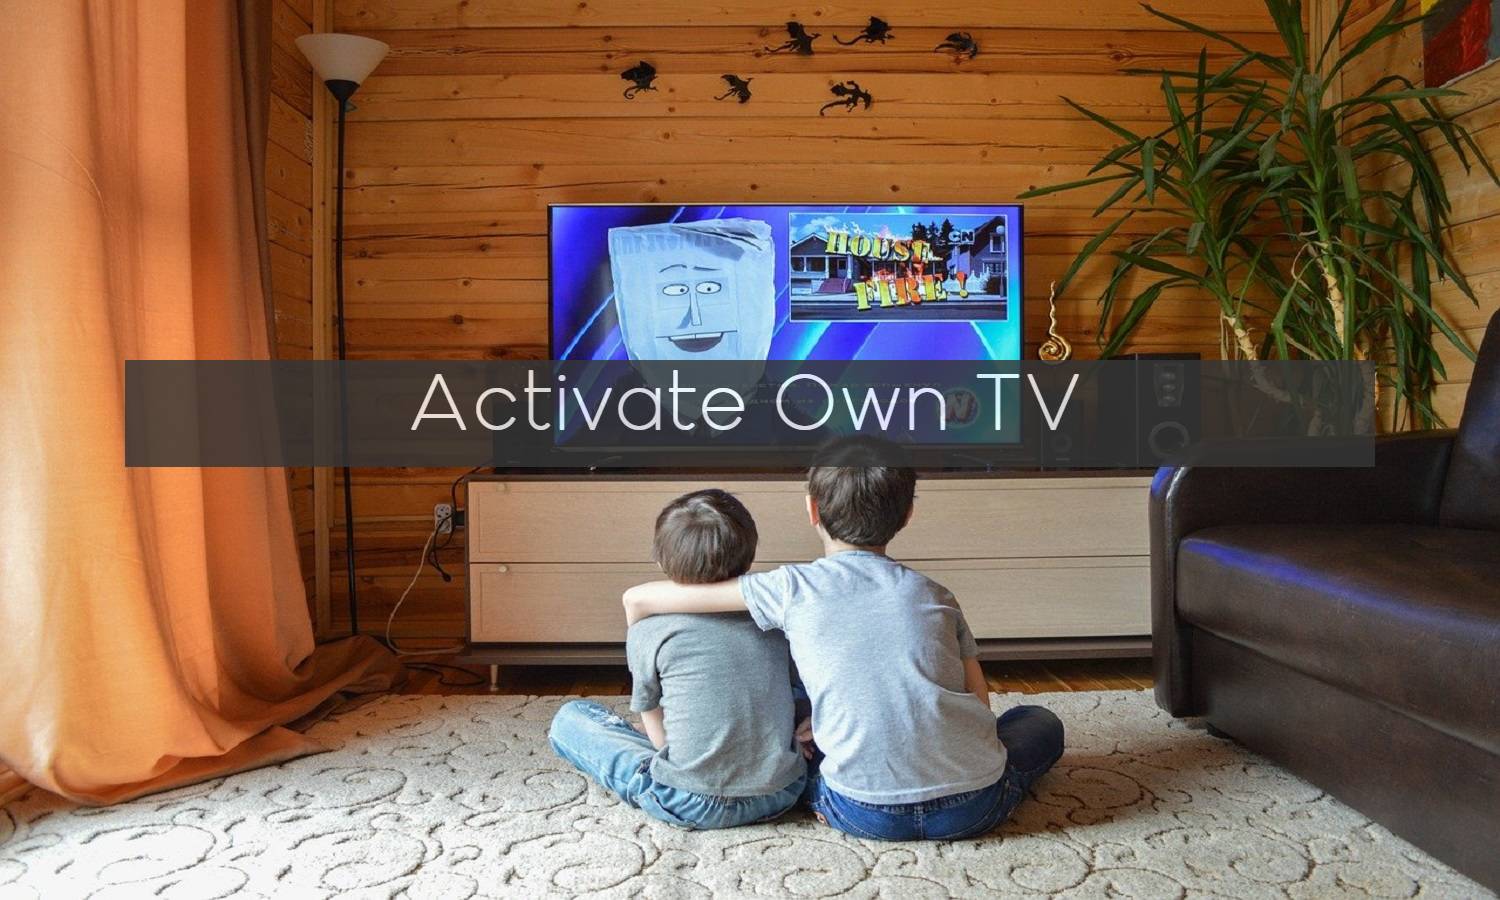 How to activate OWN TV on Roku, Fire TV, Chromecast?